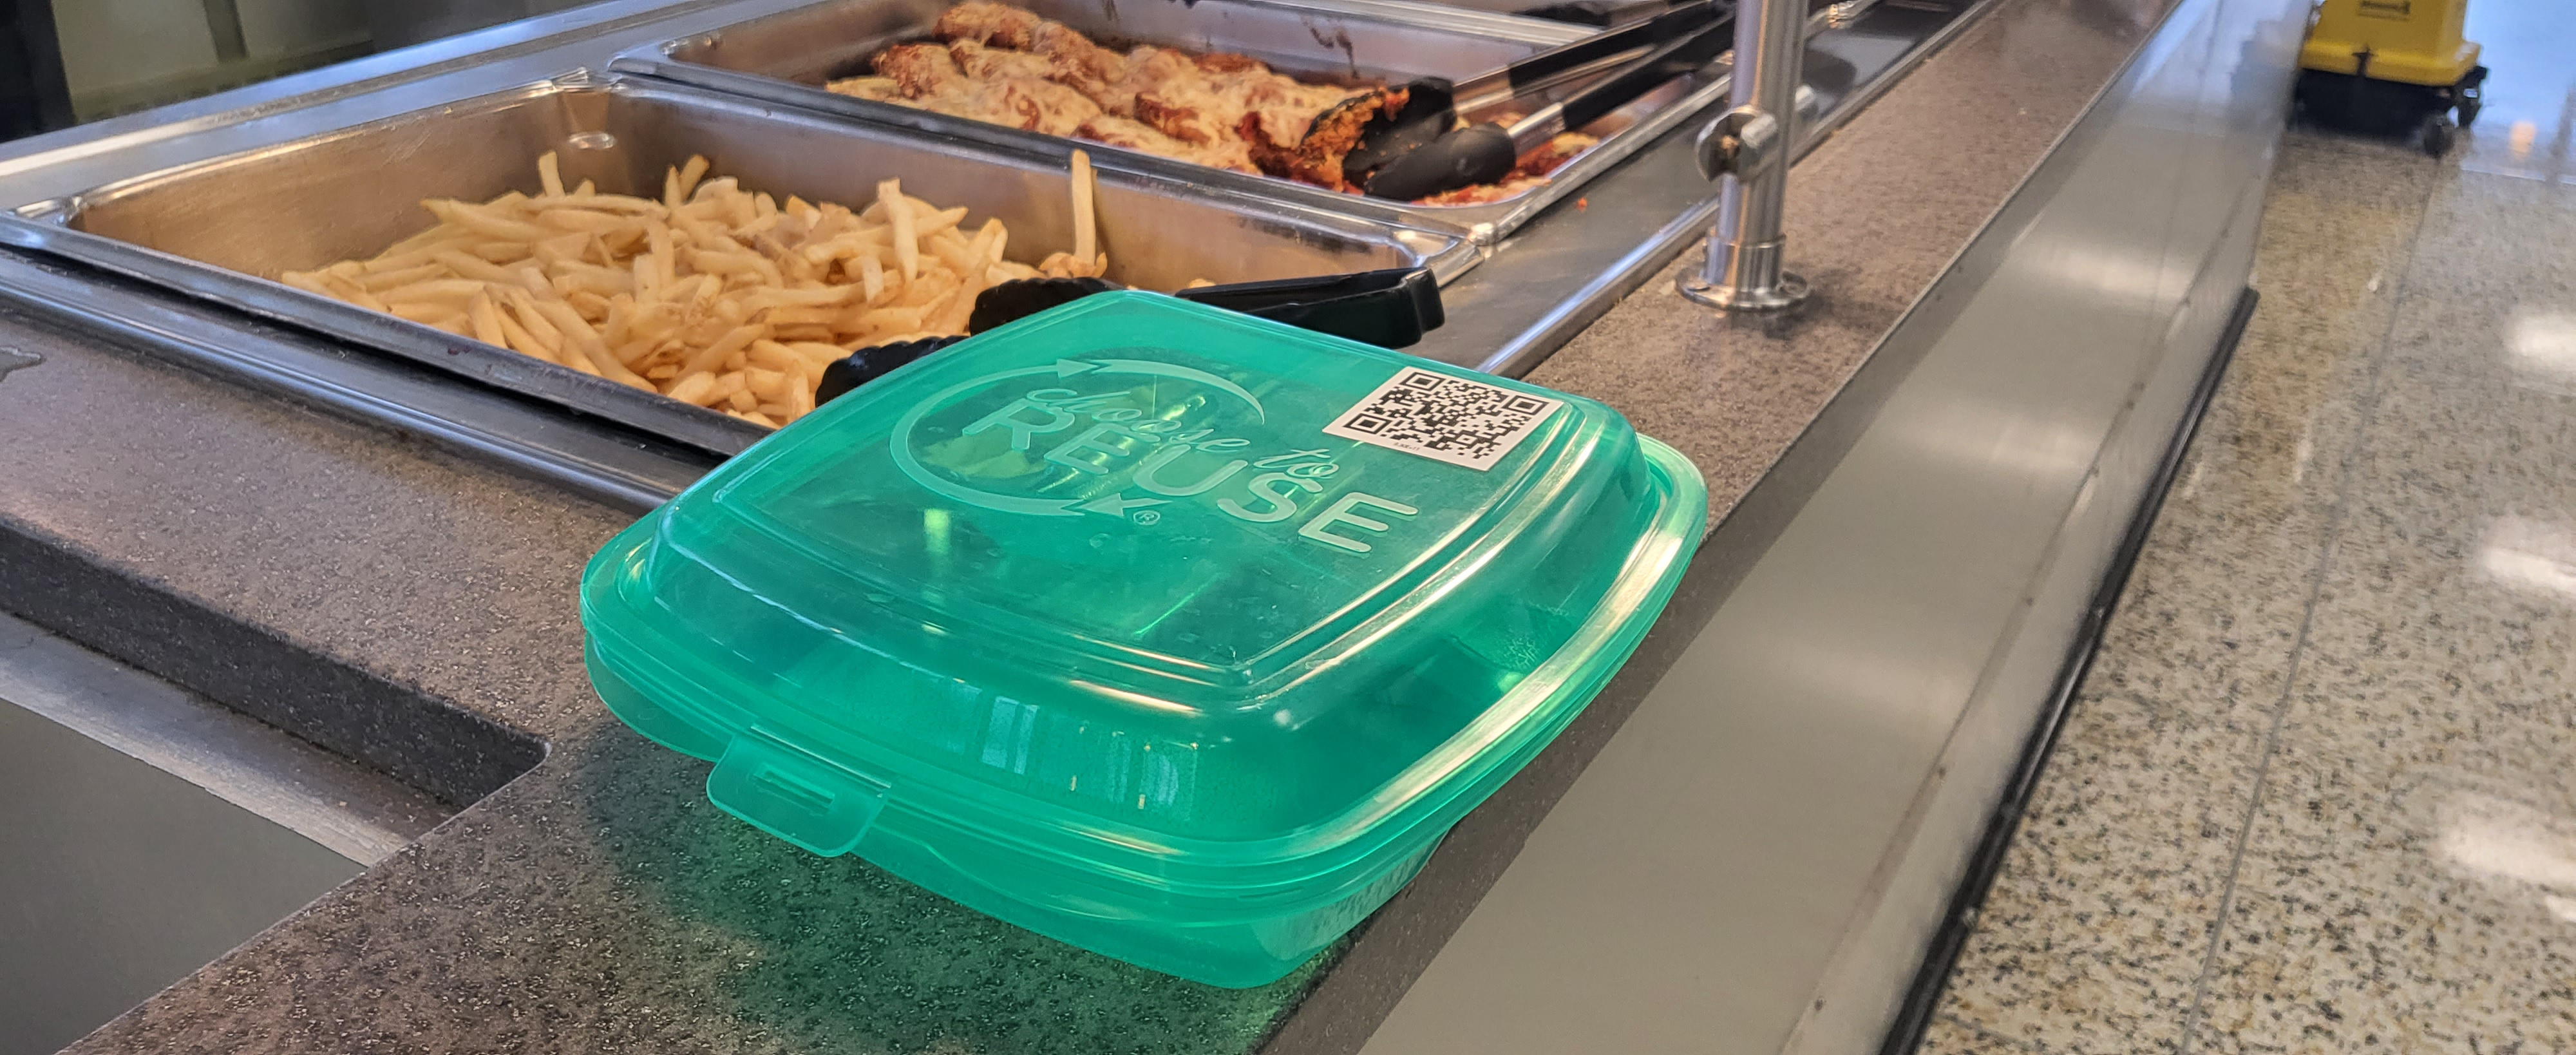 Dining Services reusable container